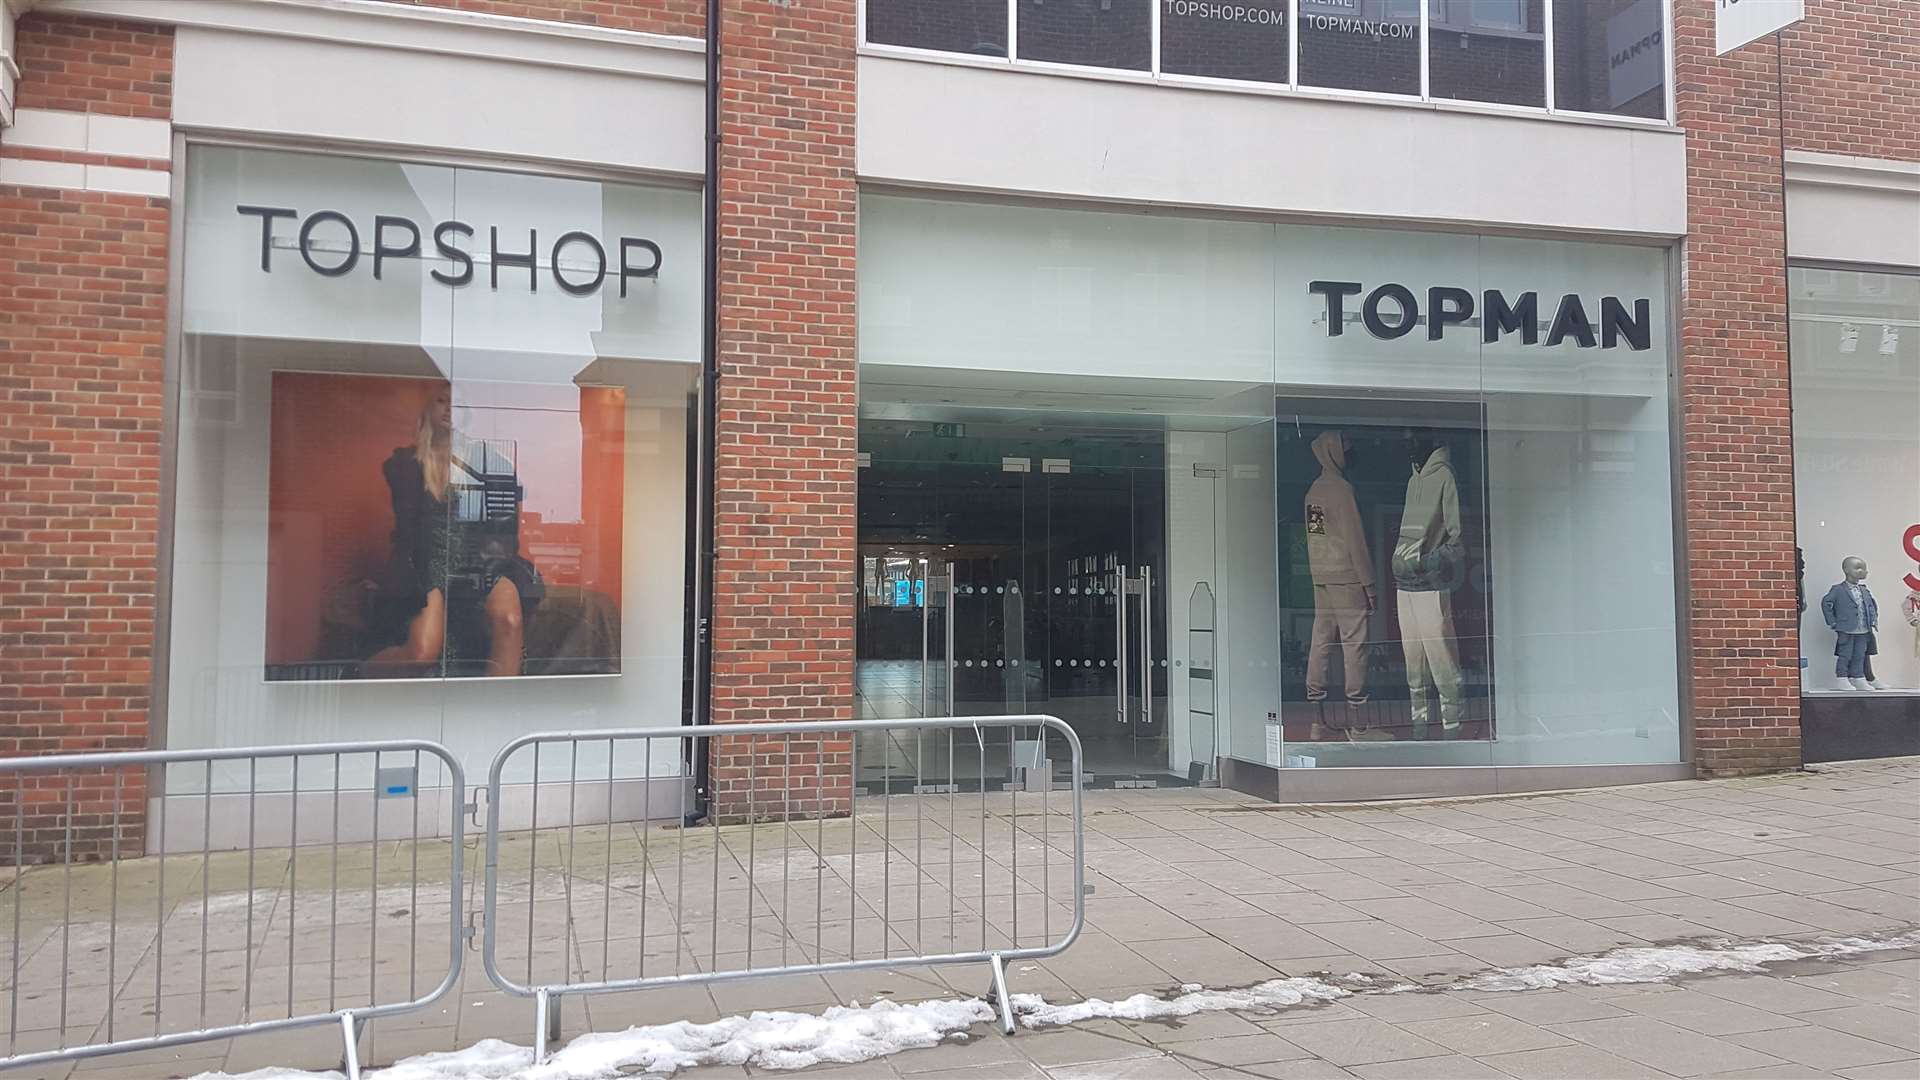 Topshop in Whitefriars has gone for good